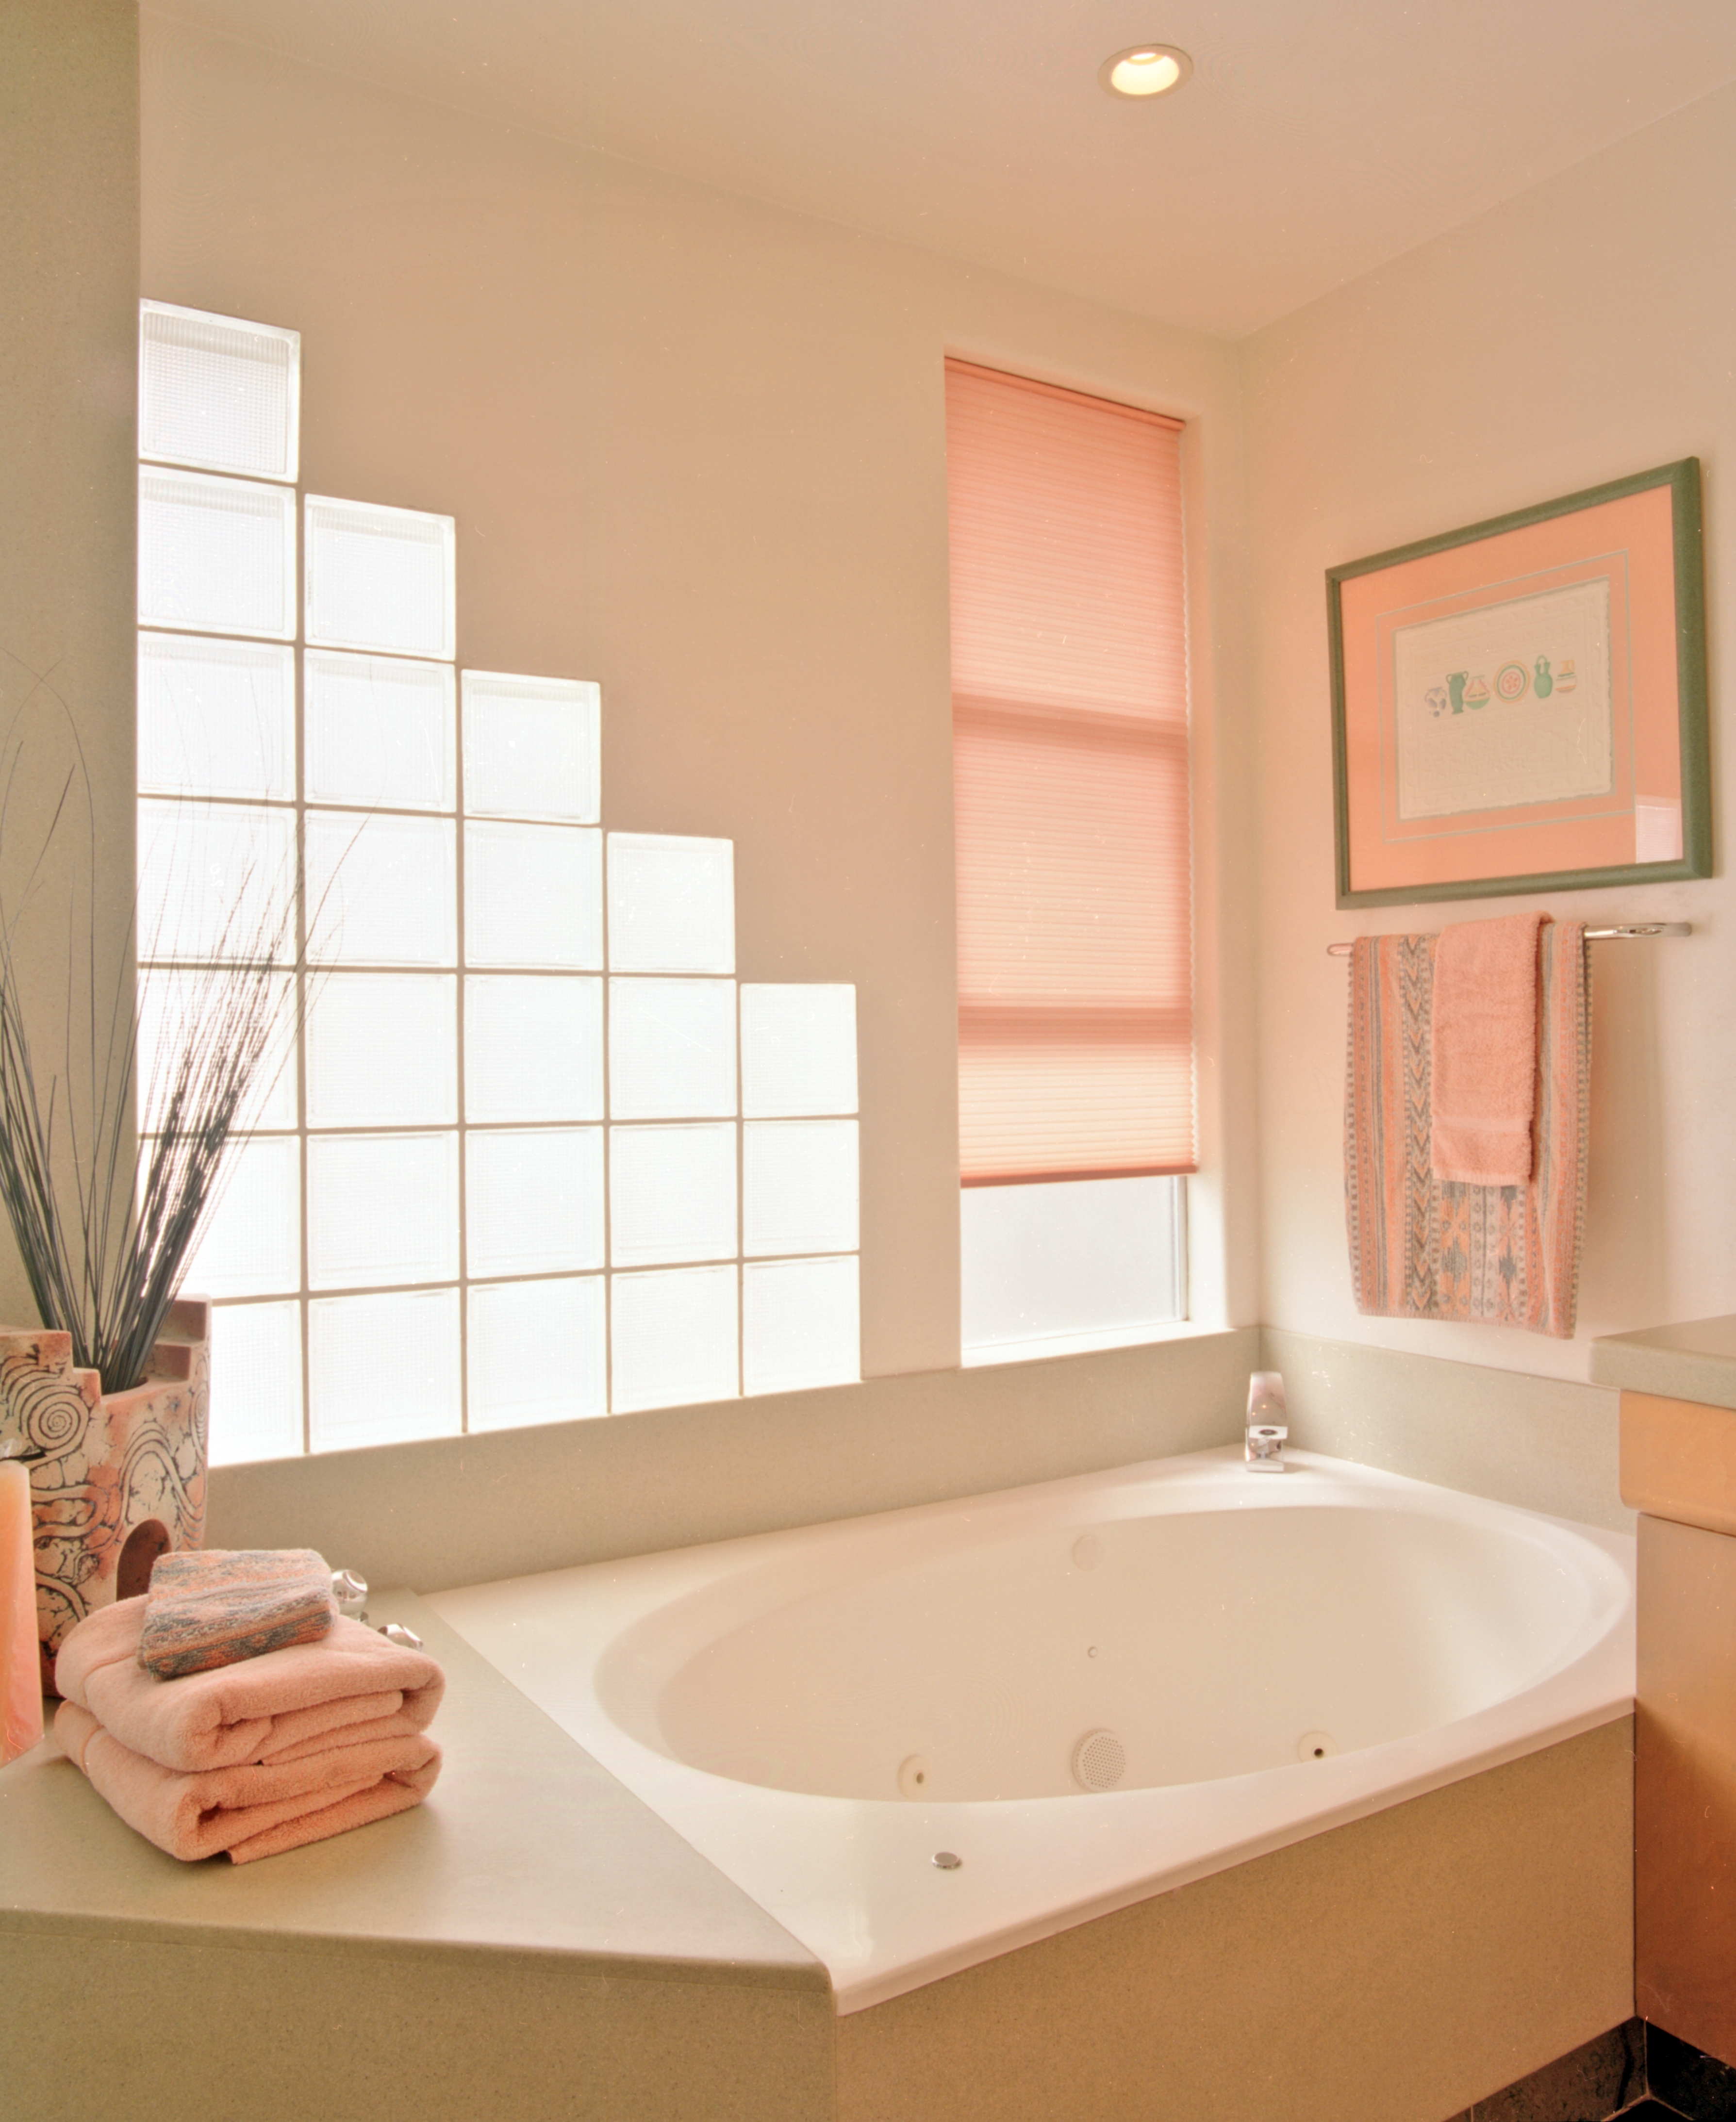 Bathroom-Surround-Cultured Marble-Salmon-LOW